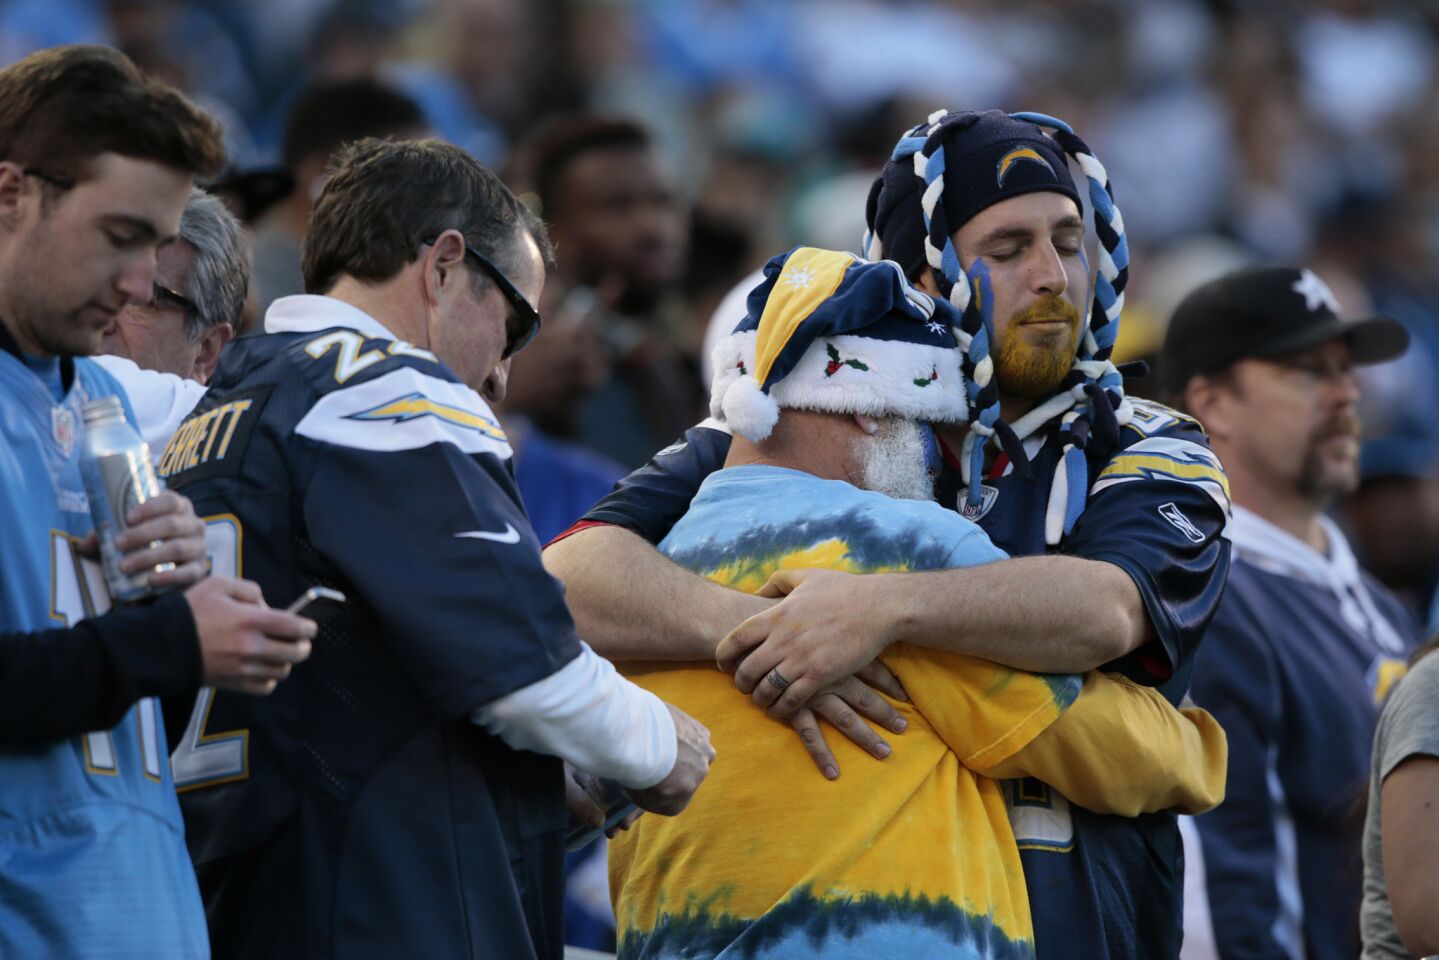 Mitchell Pellegrin (center) hugs son Justin as the final seconds tick off the clock in the Chargers' victory over the Dolphins on Sunday.